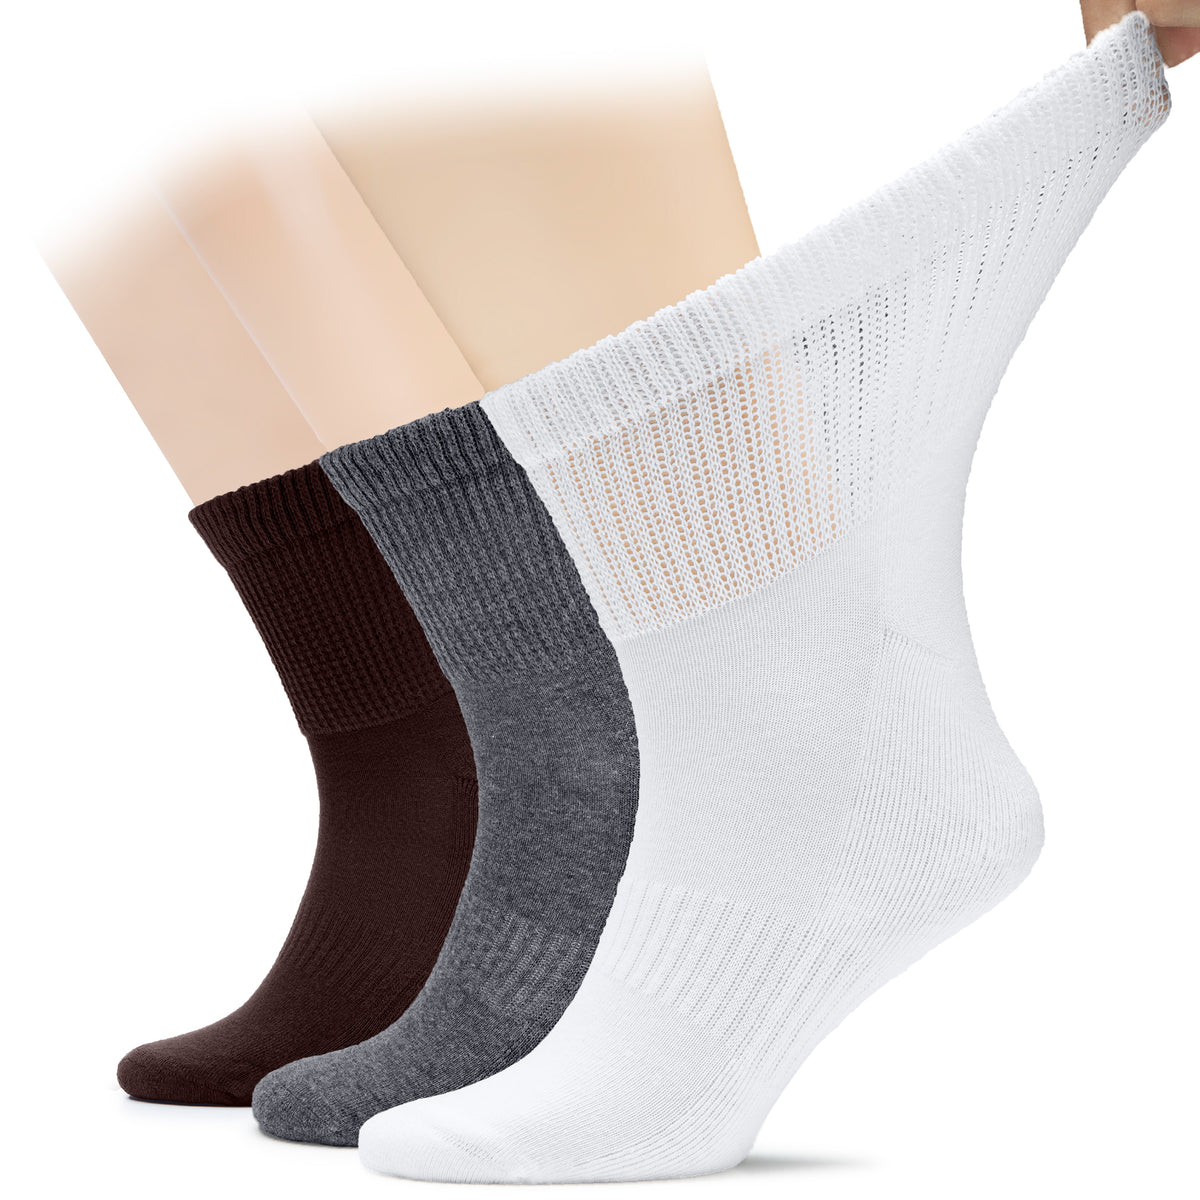 Three pairs of Men's Diabetic Ankle Socks in white, black, and brown. Designed for comfort and support, perfect for those with diabetes.